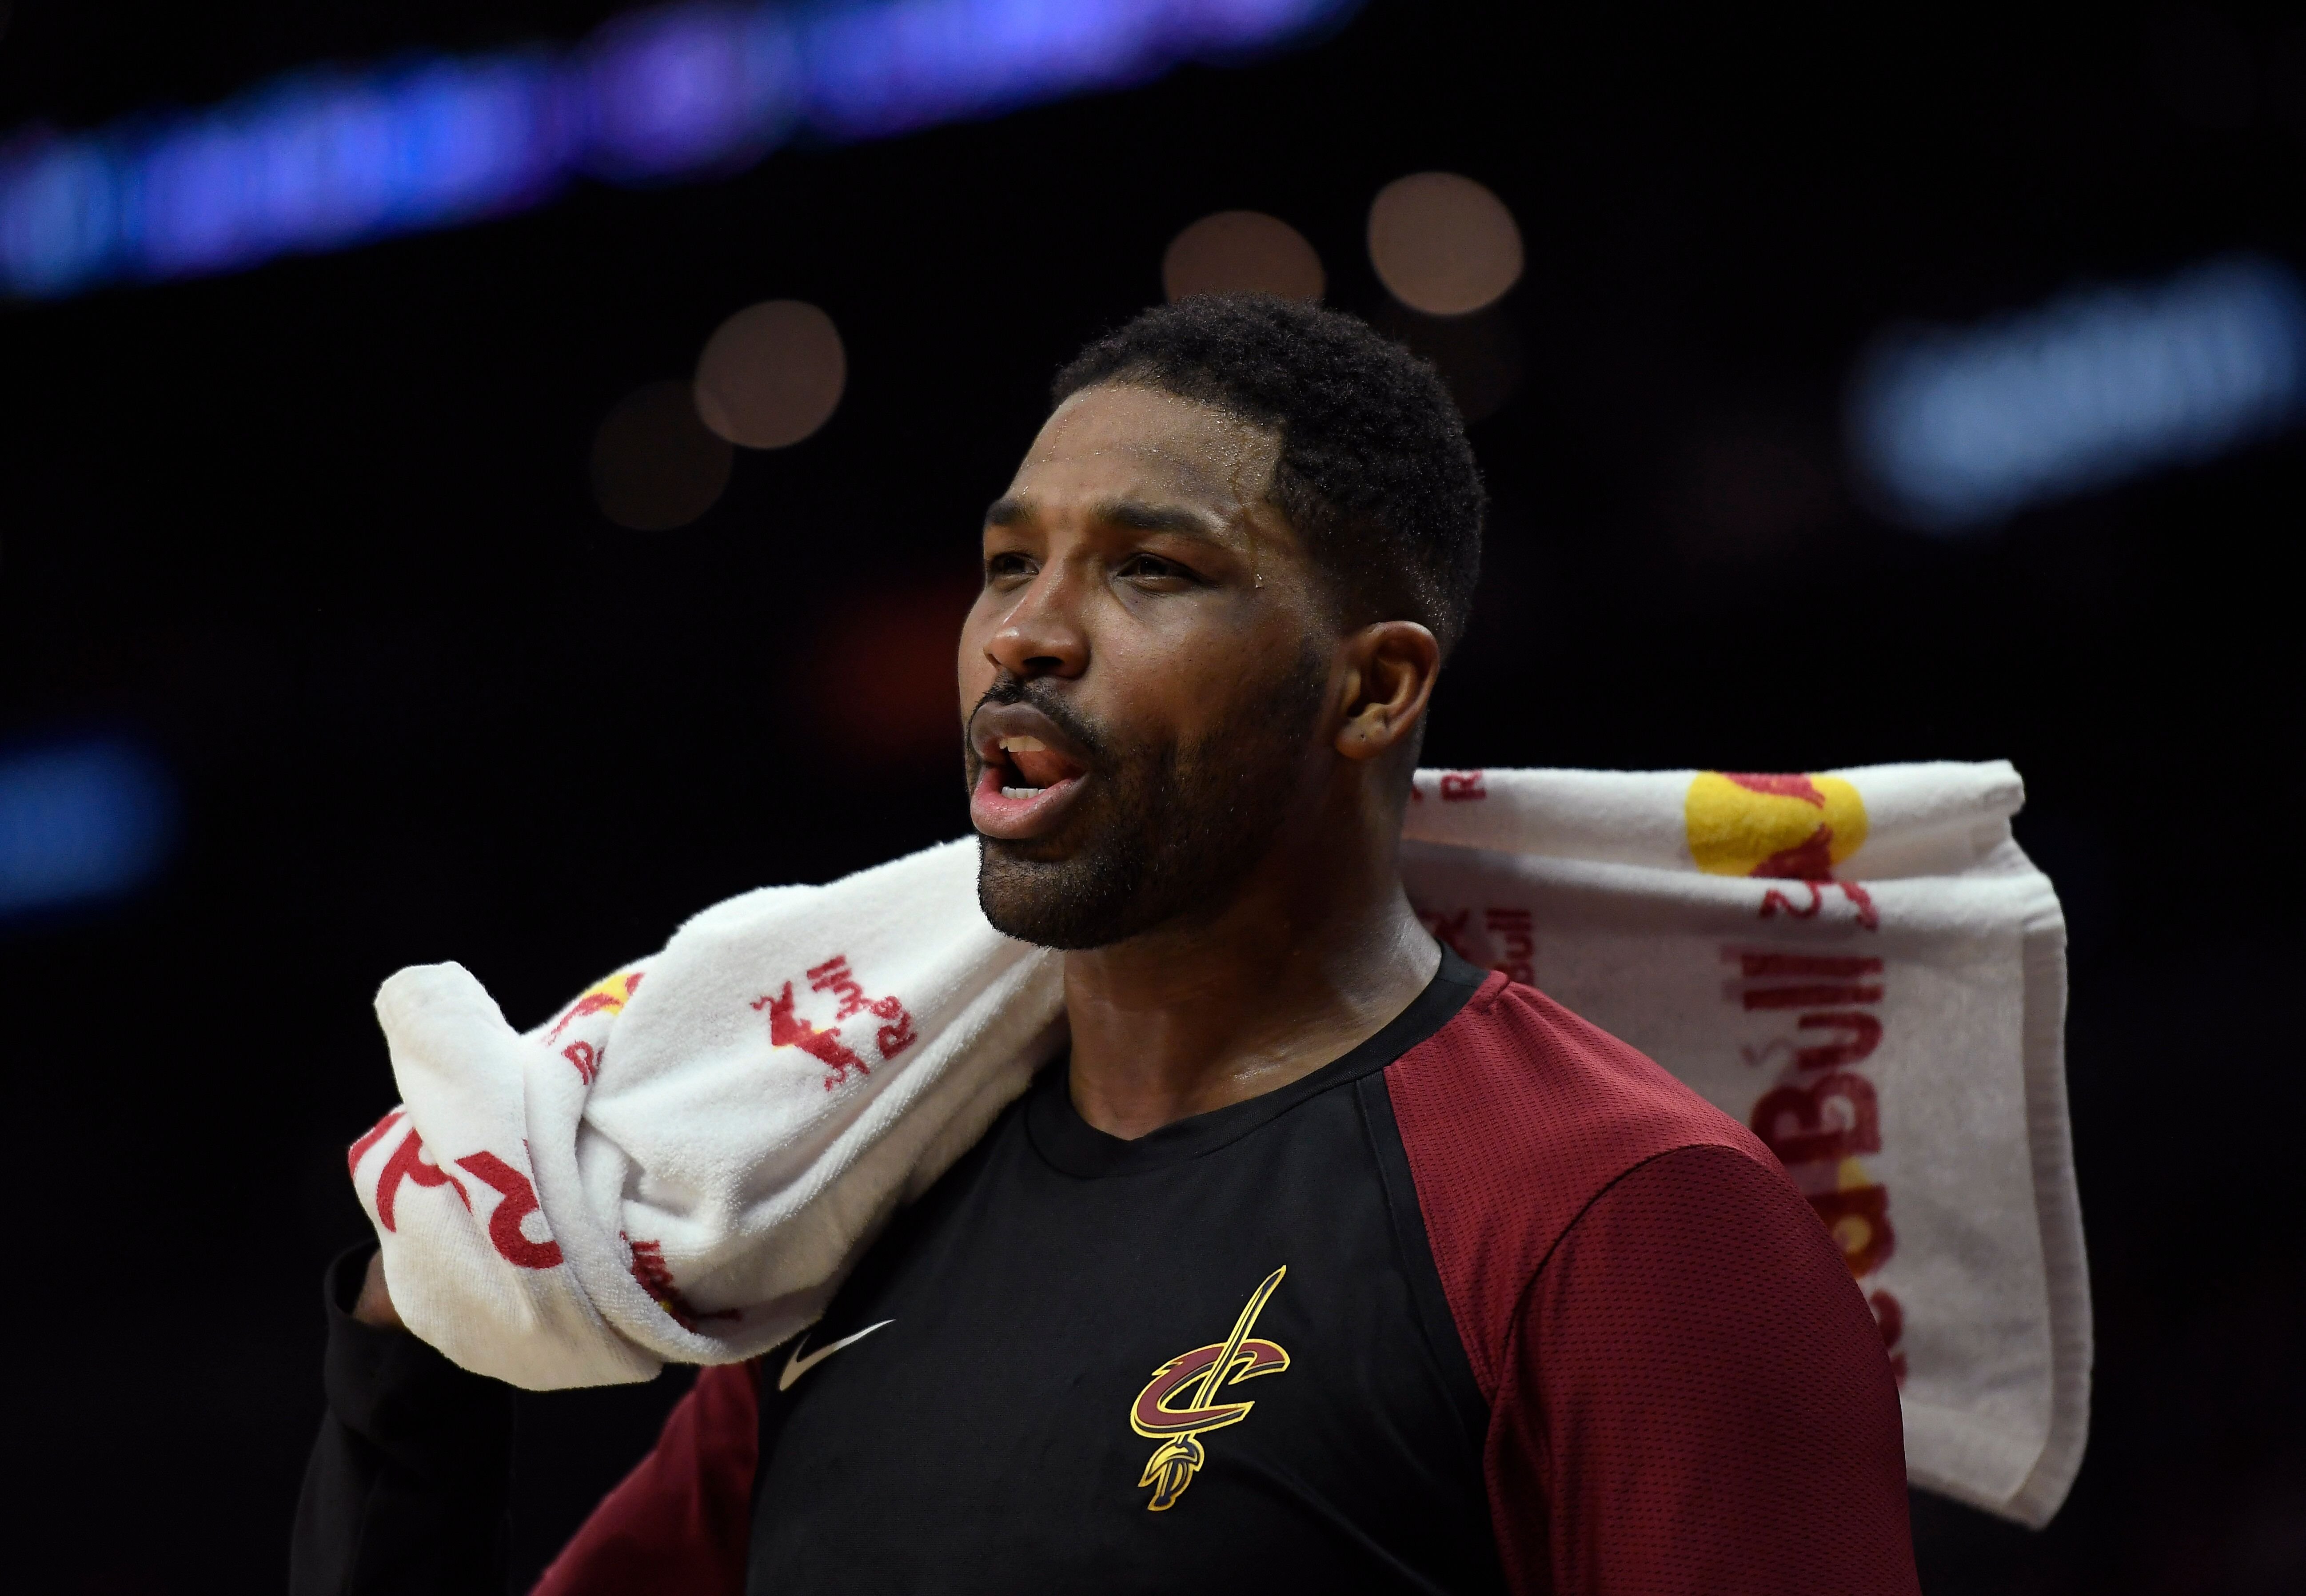 Tristan Thompson at a Cleveland Cavalier game | Source: Getty Images/GlobalImagesUkraine